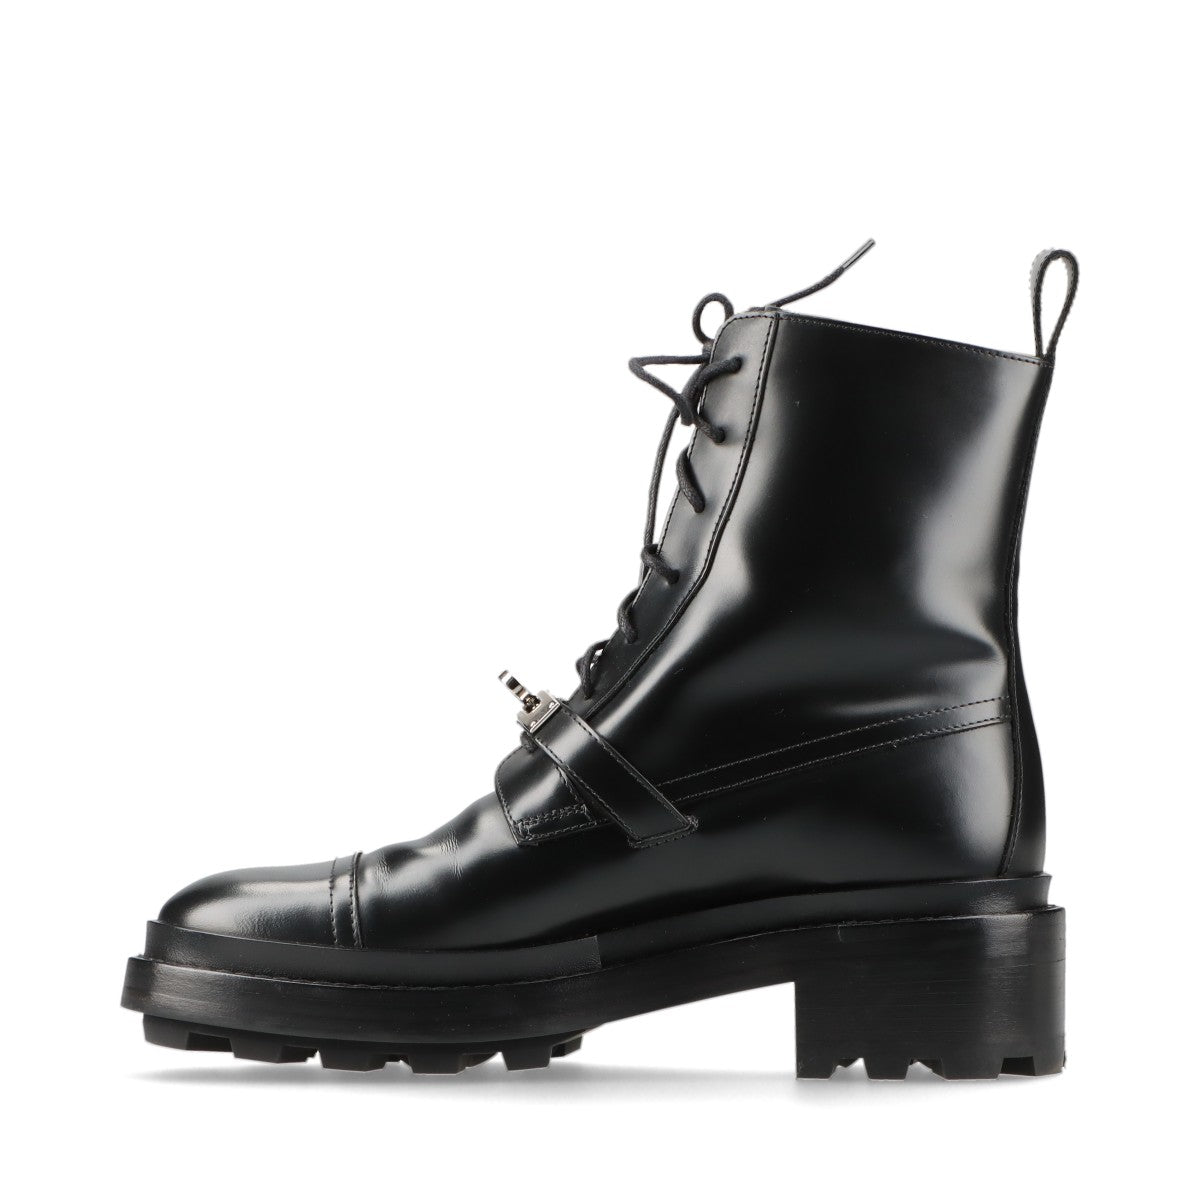 Hermès Funk Leather Short Boots EU38 1/2 Ladies' Black Kelly Metal Fittings Replacement string Box There is a bag